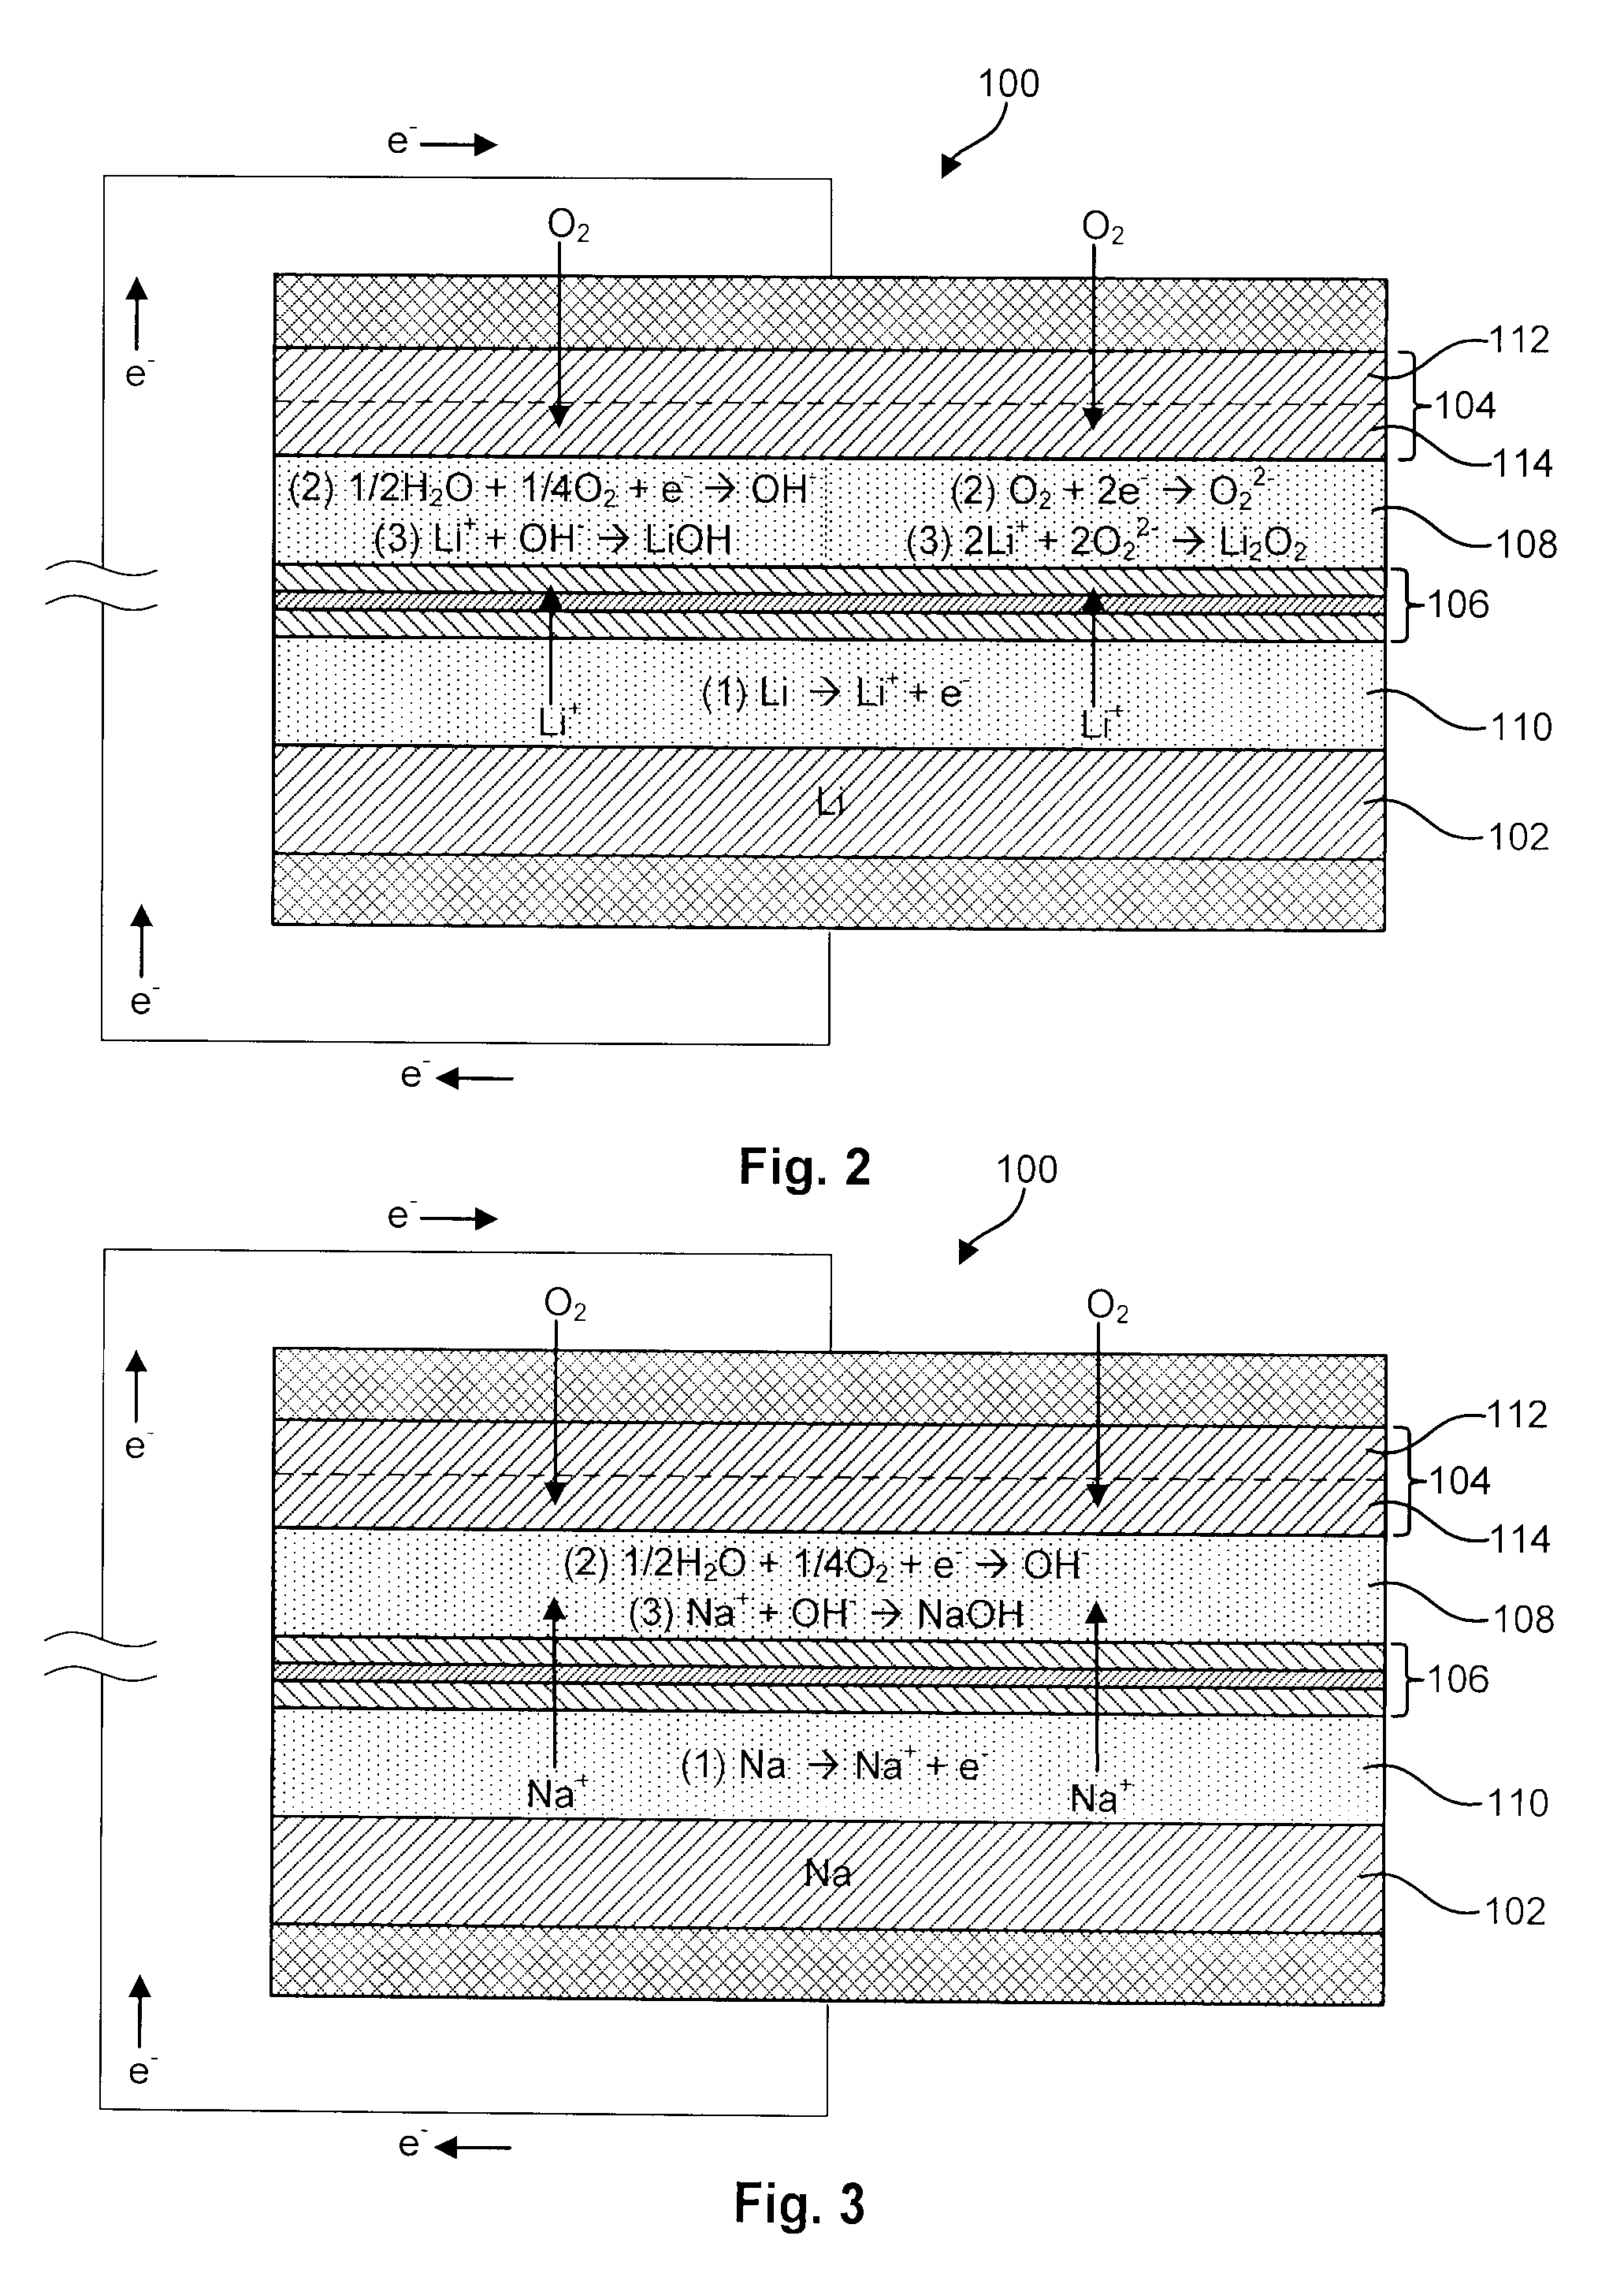 Advanced Metal-Air Battery Having a Ceramic Membrane Electrolyte Background of the Invention